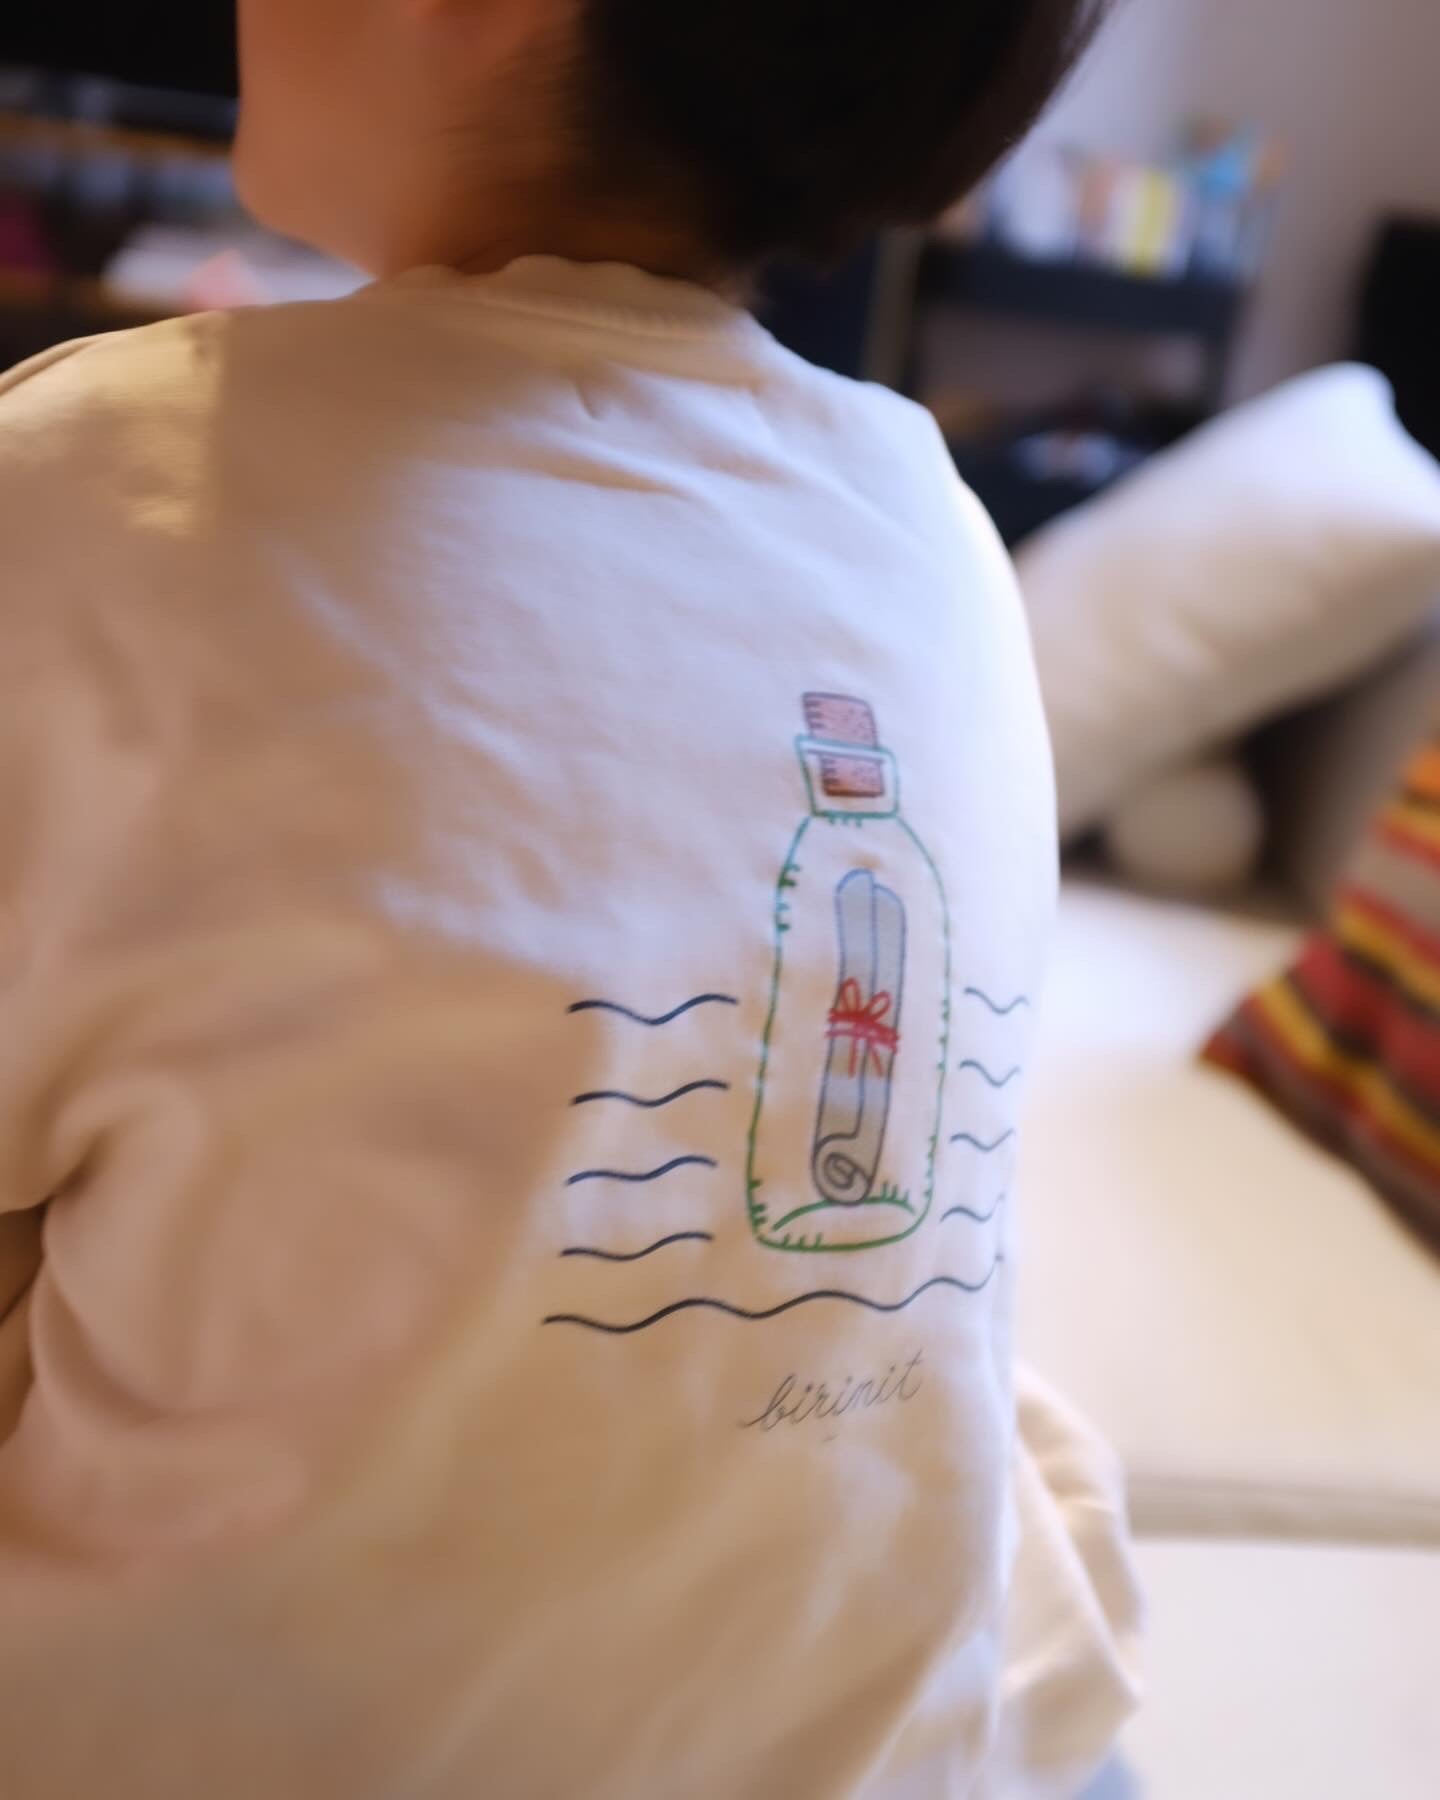 Message in the bottle sweater